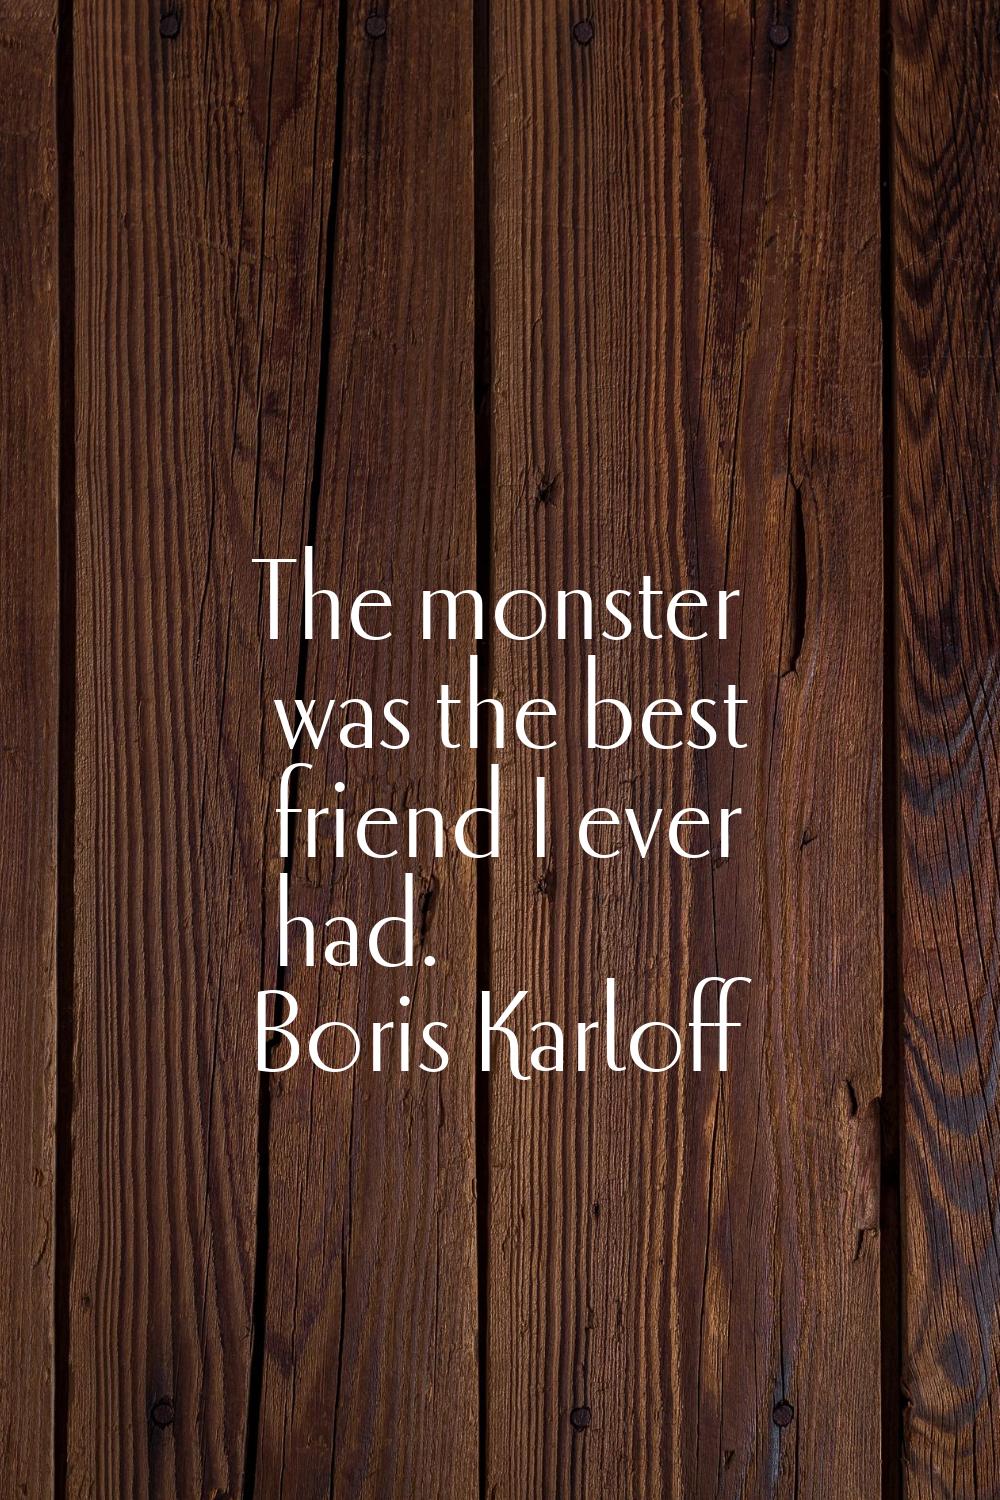 The monster was the best friend I ever had.